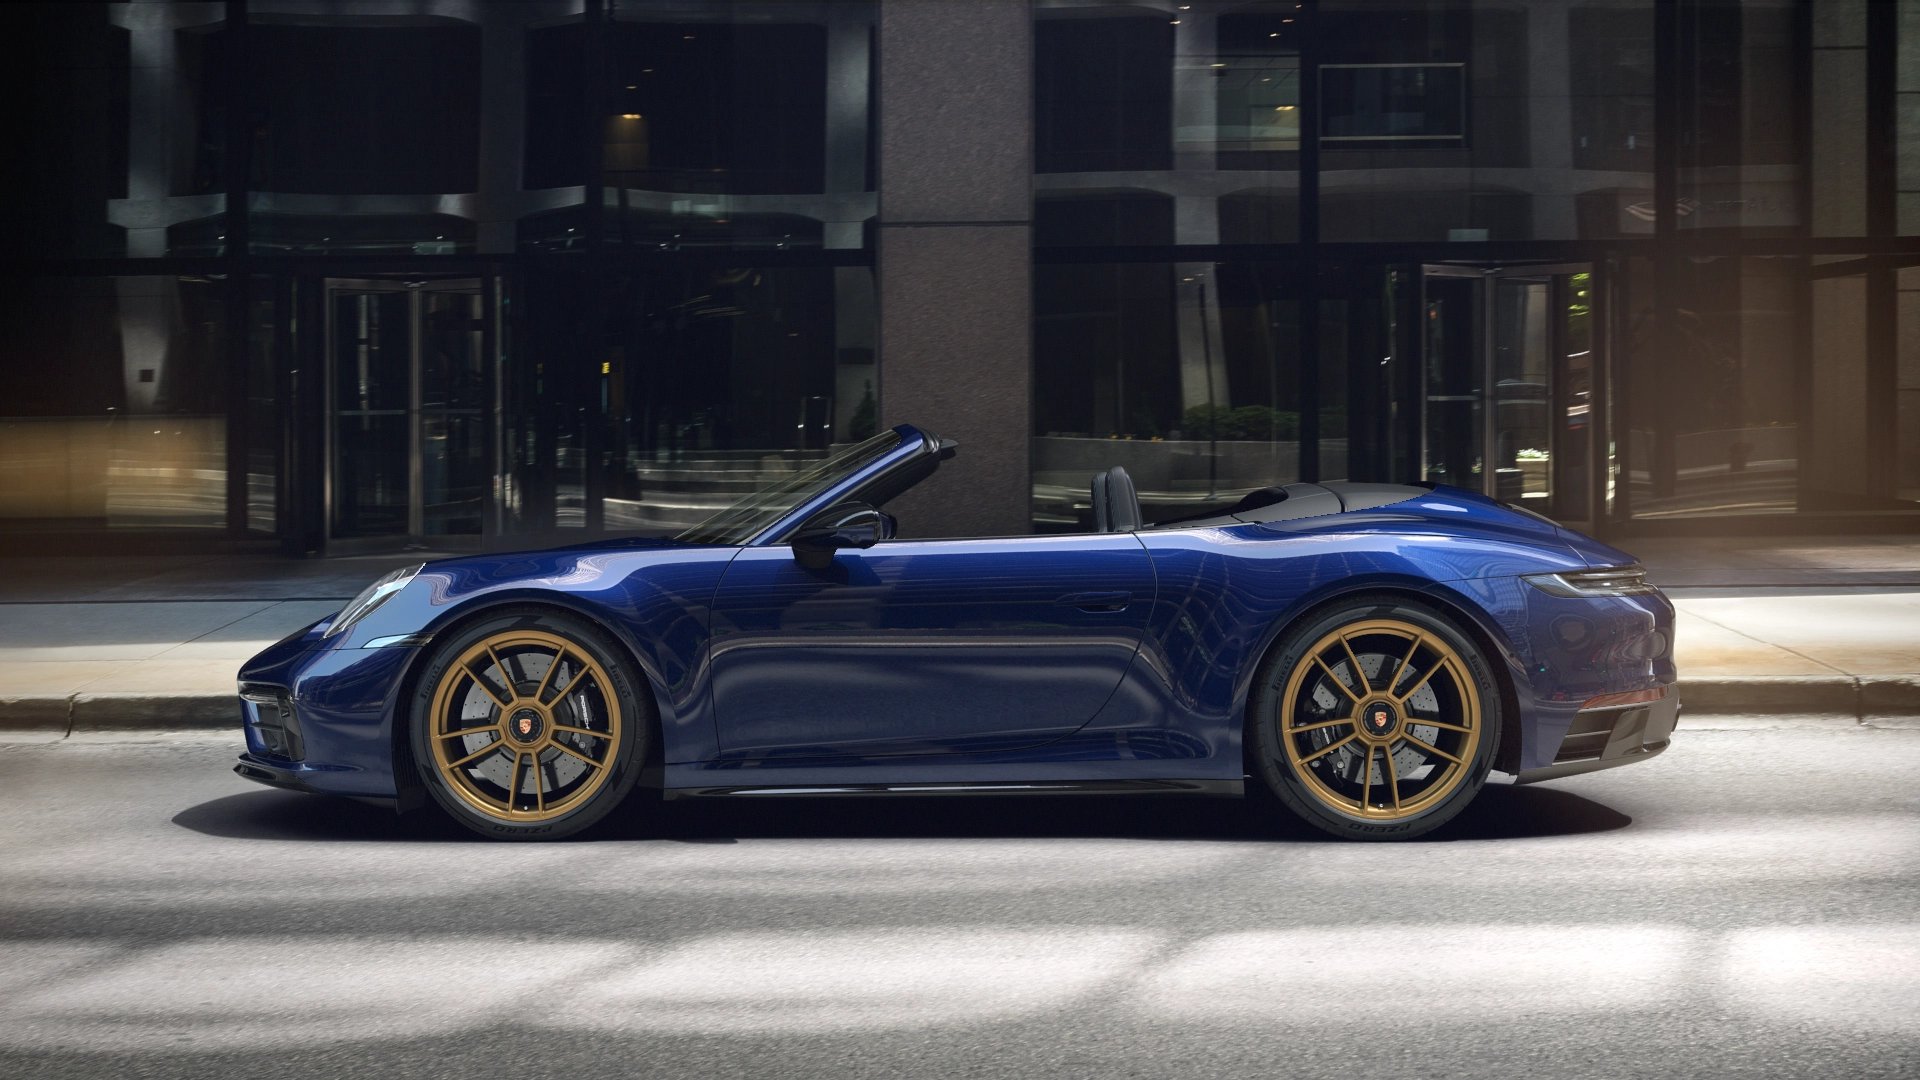 911 Carrera GTS Cabriolet side view